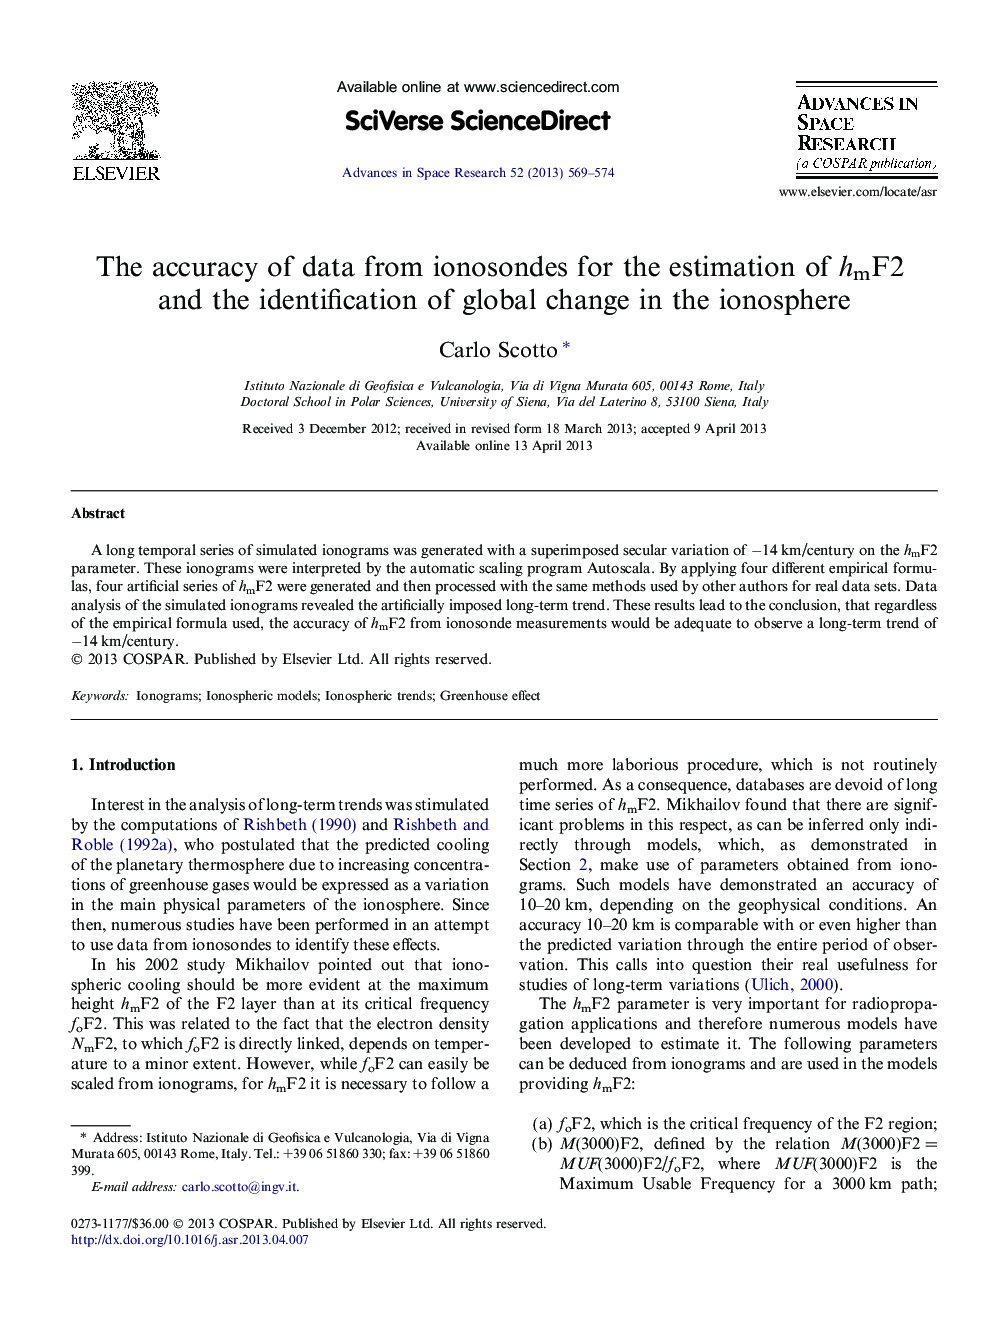 The accuracy of data from ionosondes for the estimation of hmF2 and the identification of global change in the ionosphere